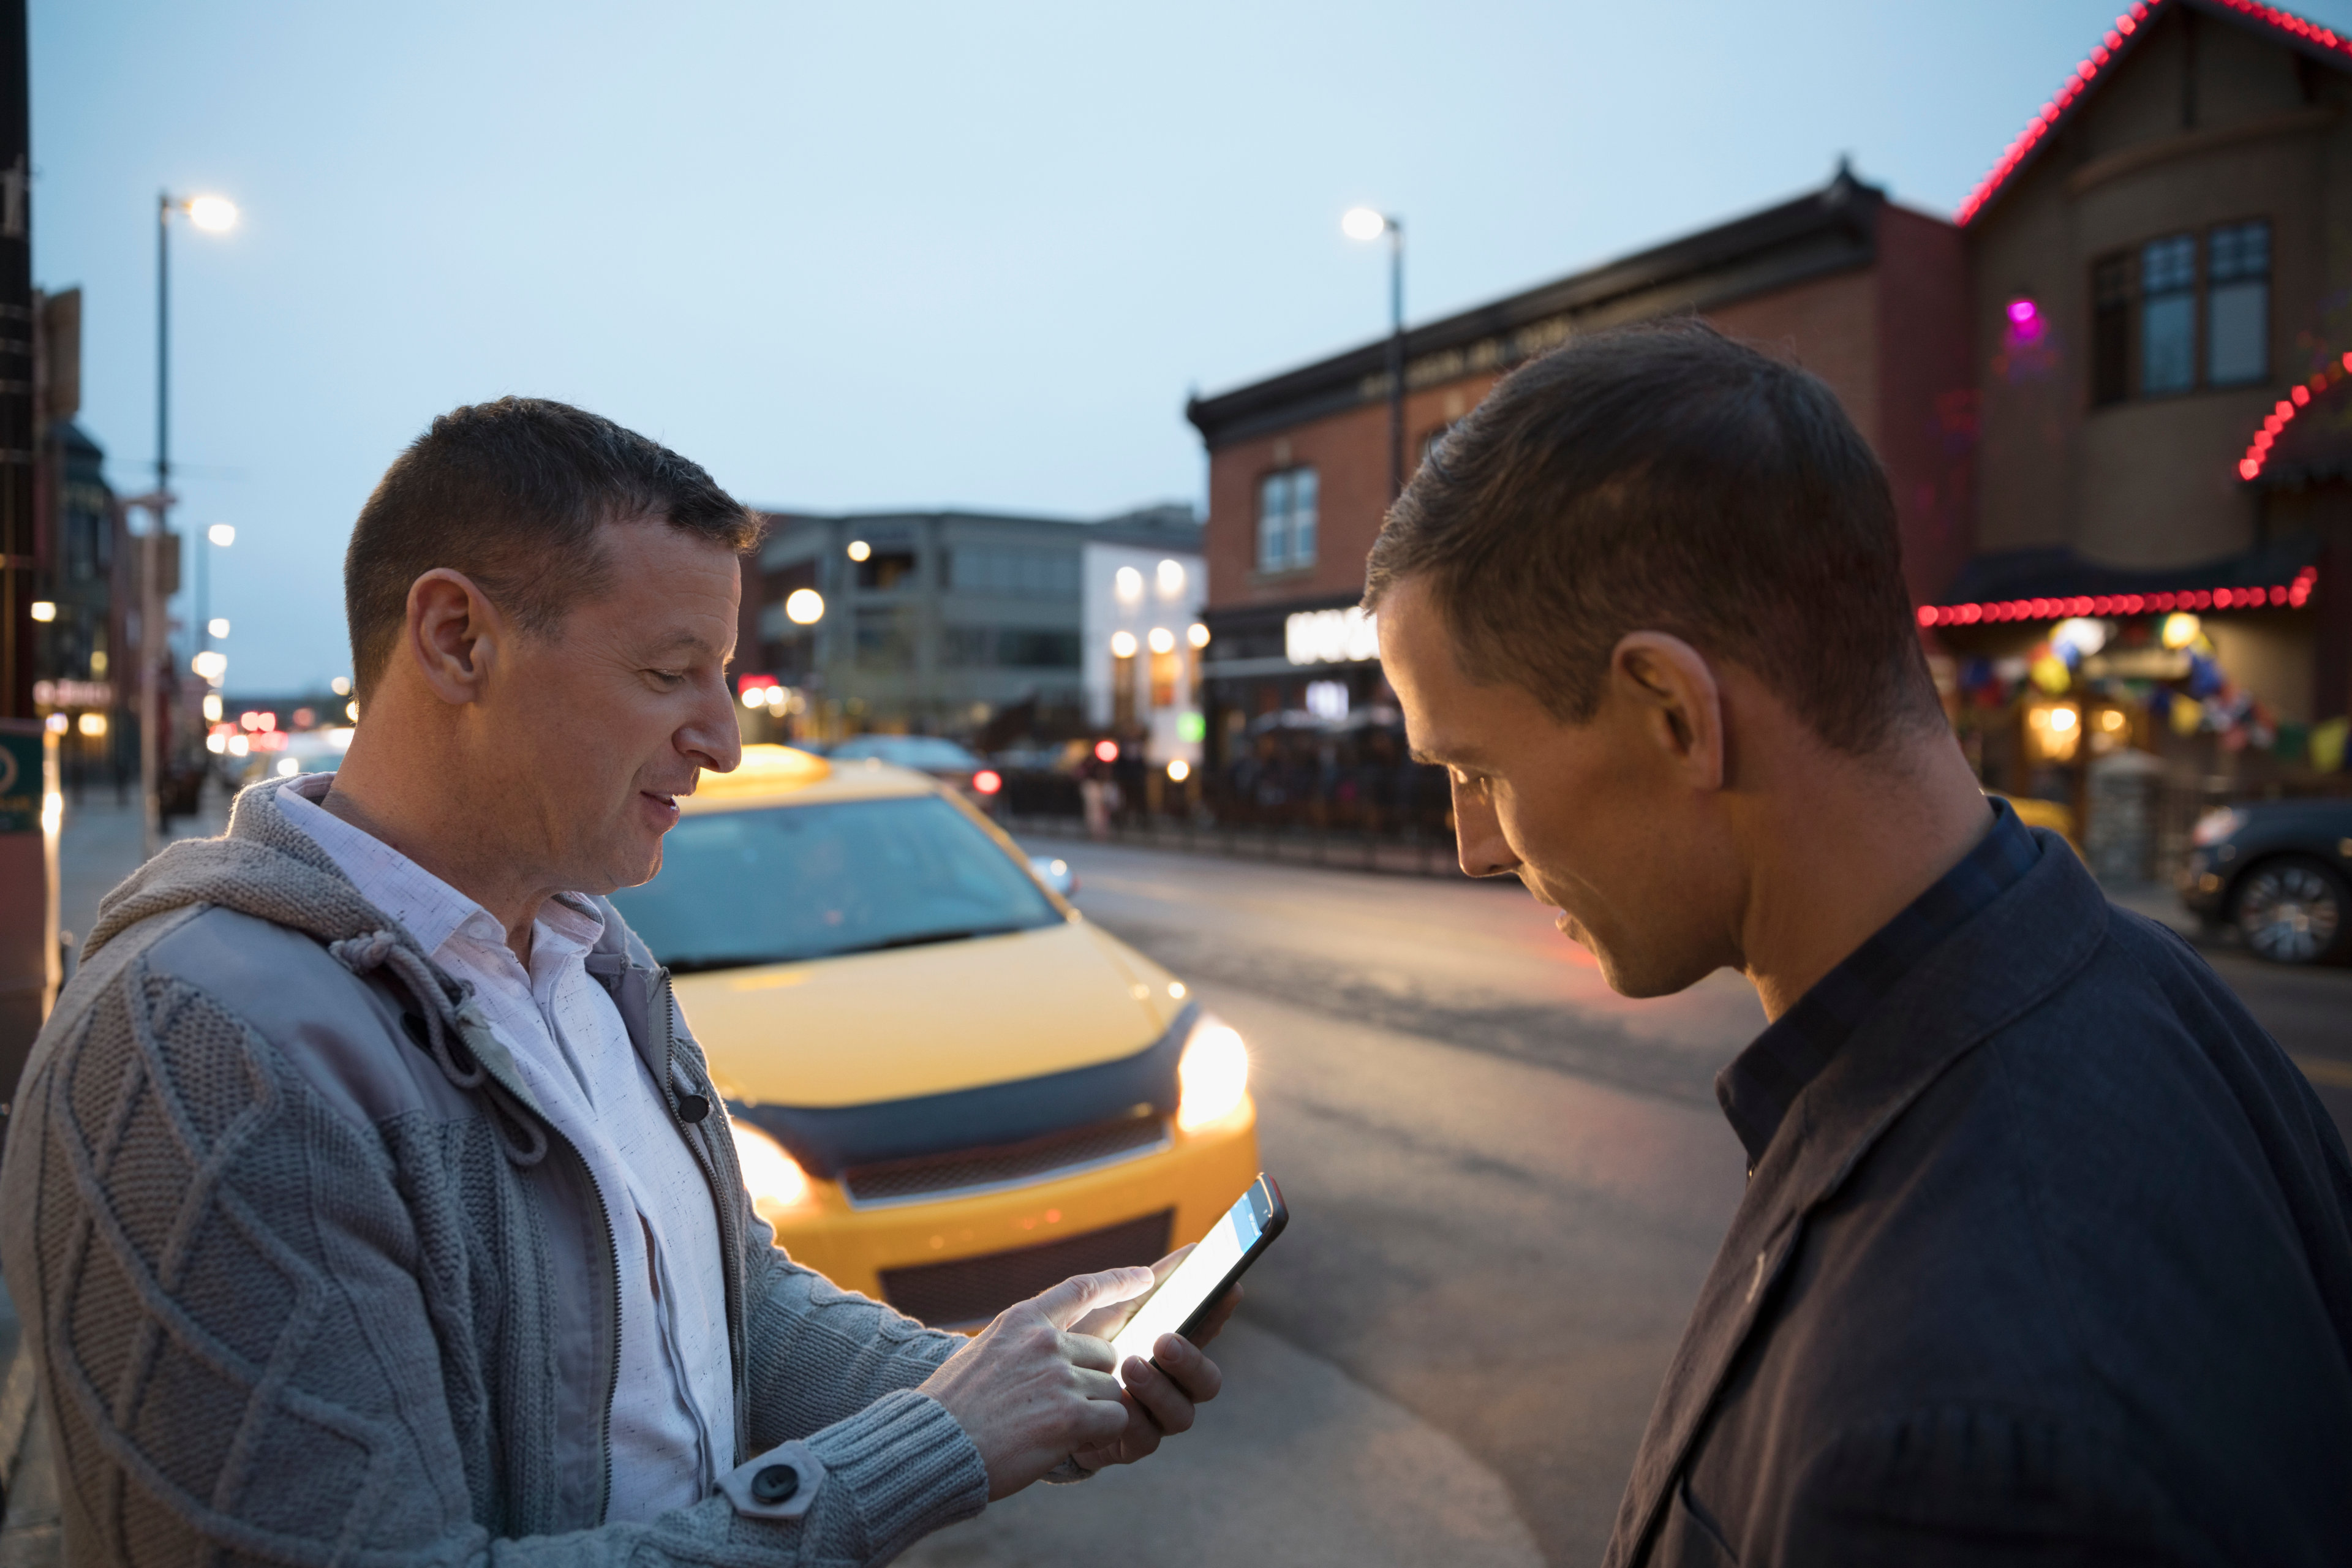 Men using smartphone for crowdsourced taxi on urban street at night